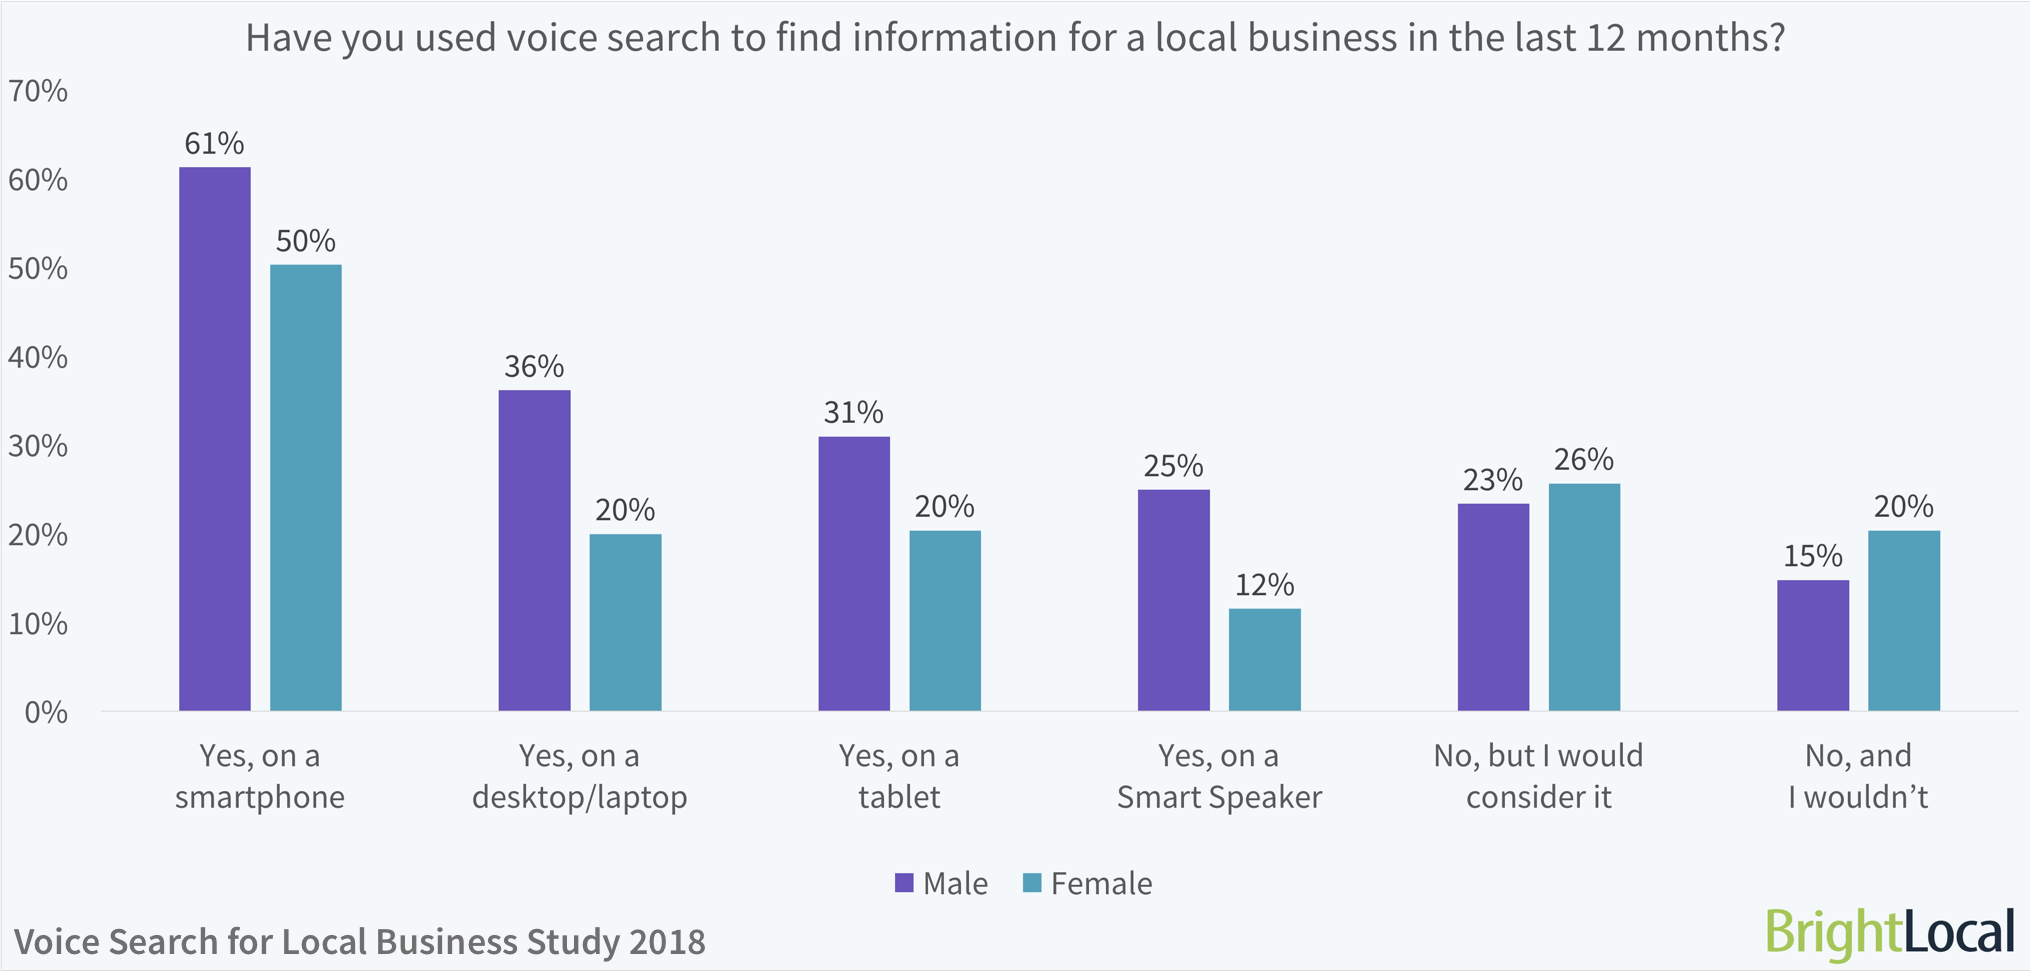 Gender Split: Have you used voice search to find information for a local business in the last 12 months? | BrightLocal Voice Search for Local Business Study